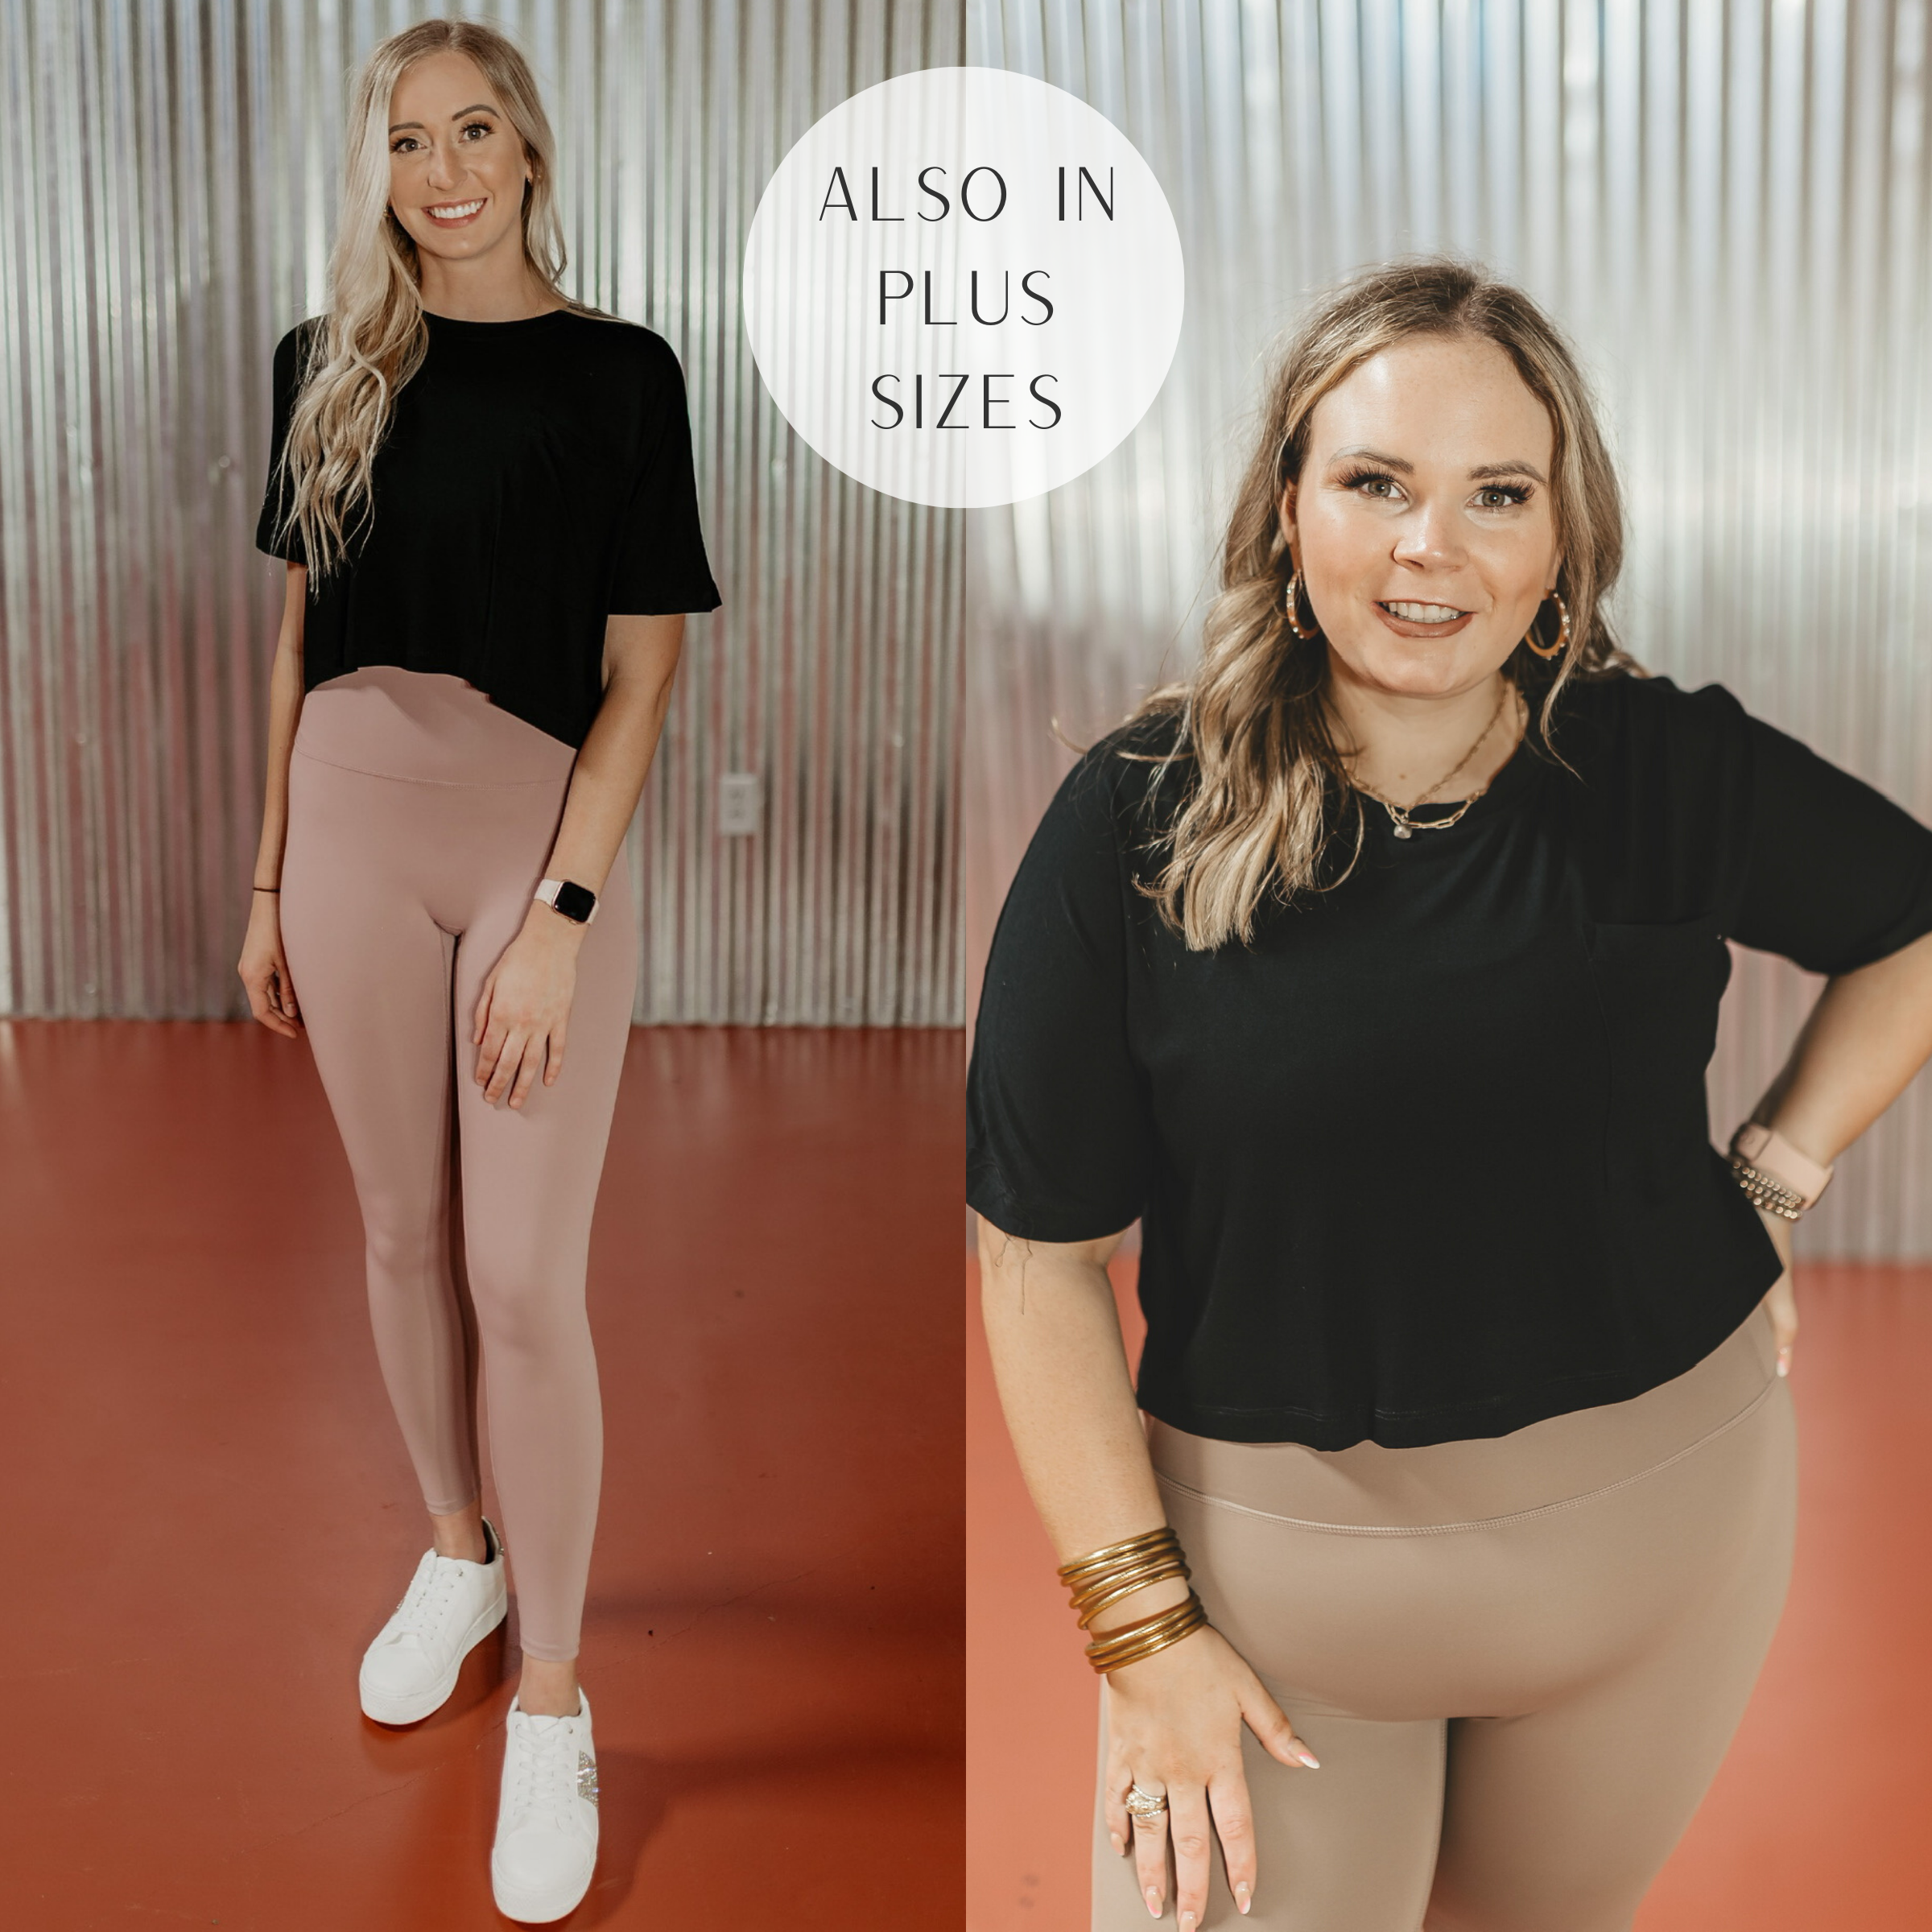 Models are wearing a black crop top that has a pocket.  Size small model has it paired with dusty pink leggings, white sneakers, and gold jewelry. Size large model has it paired with taupe pants and gold jewelry.